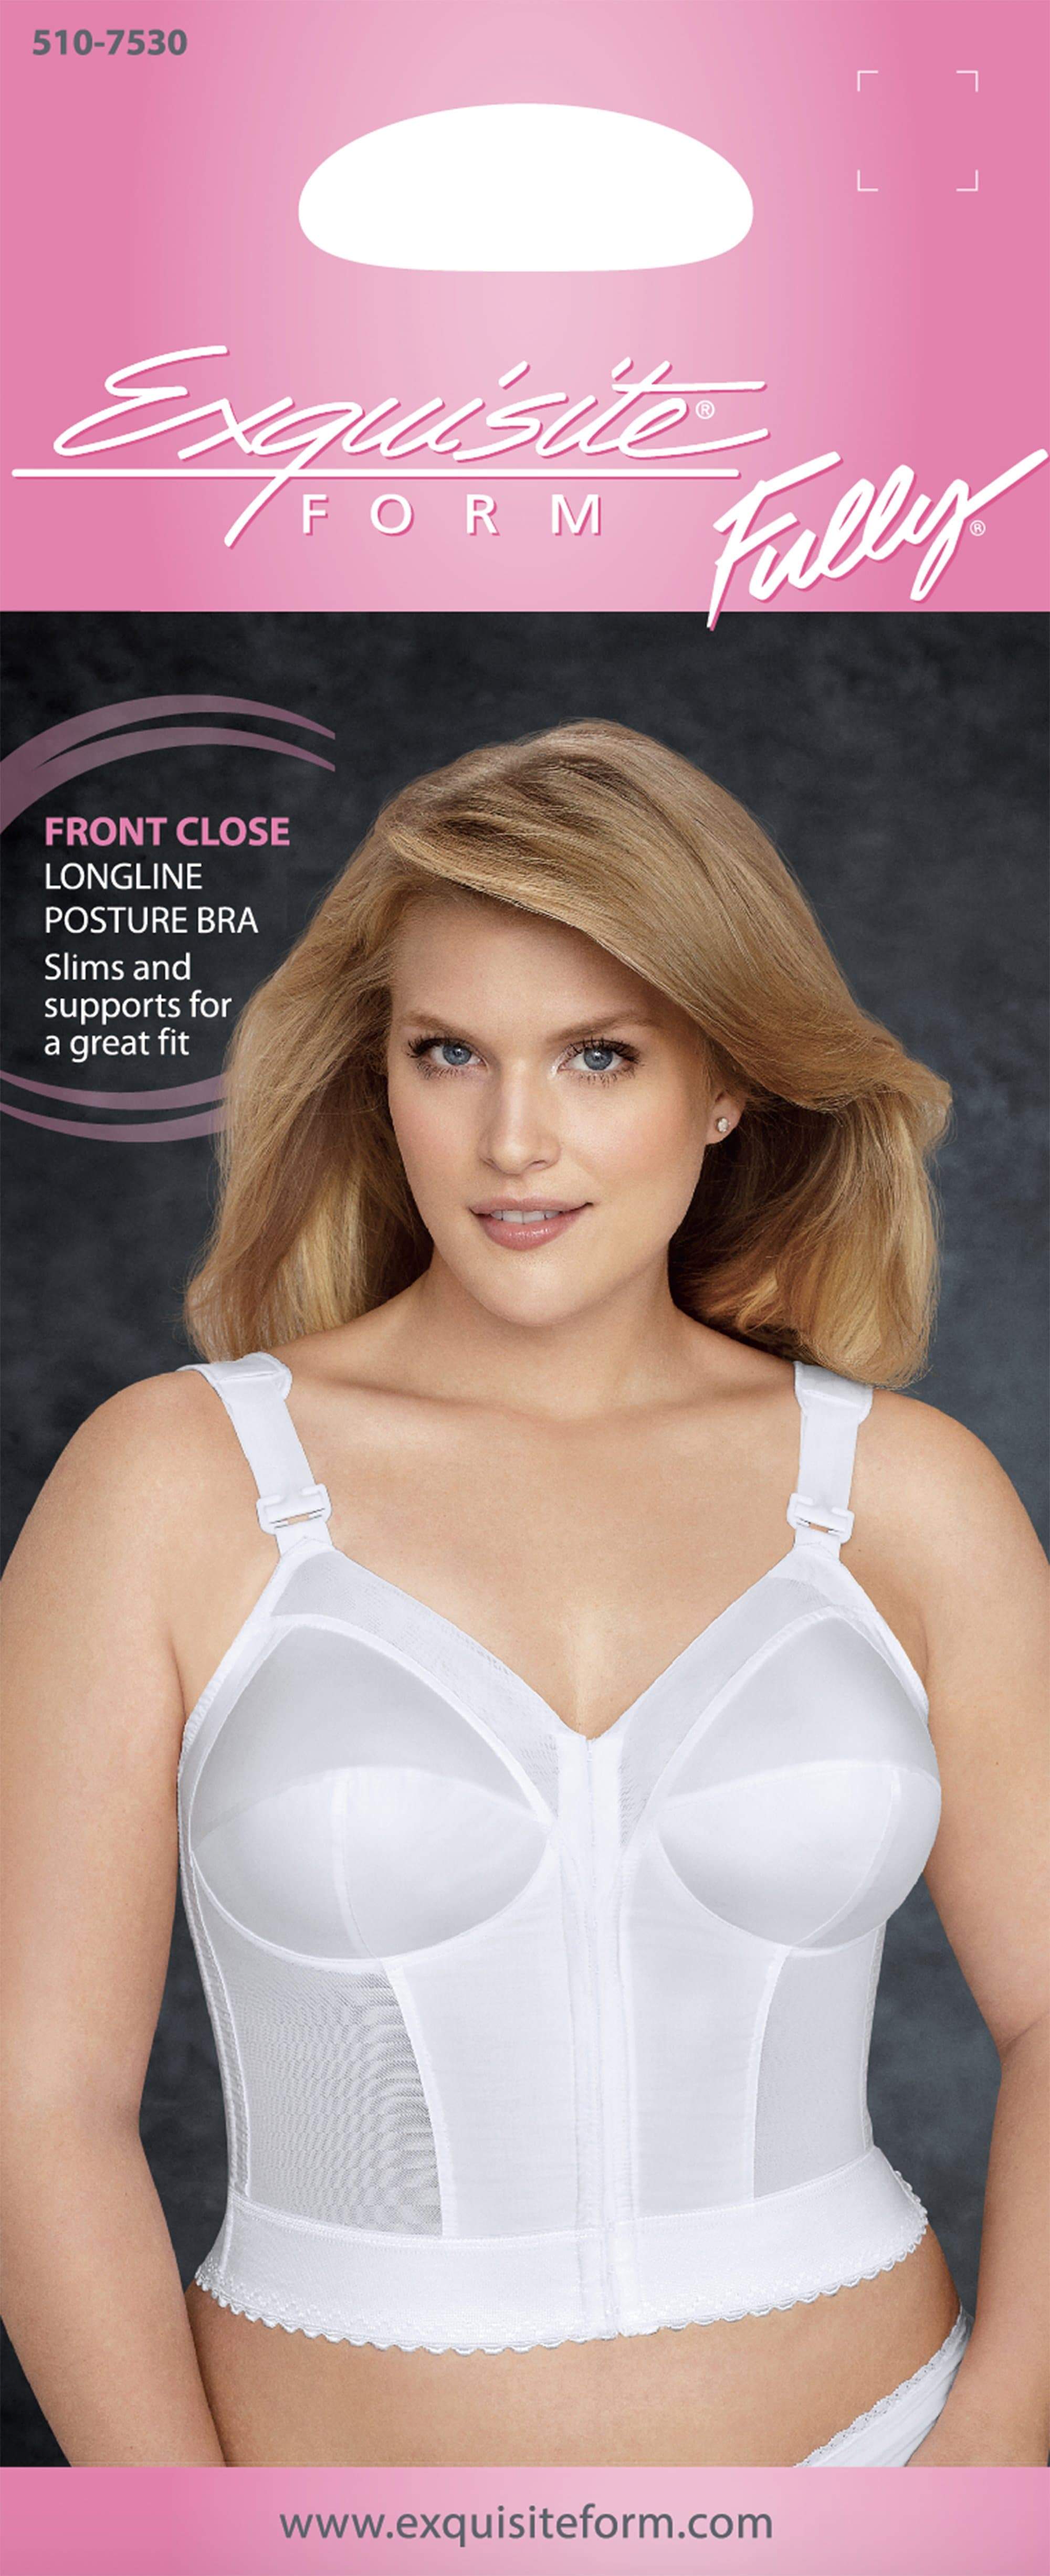 Exquisite Form Longline - - Bra Close Fully Bras White Posture Curvy Front